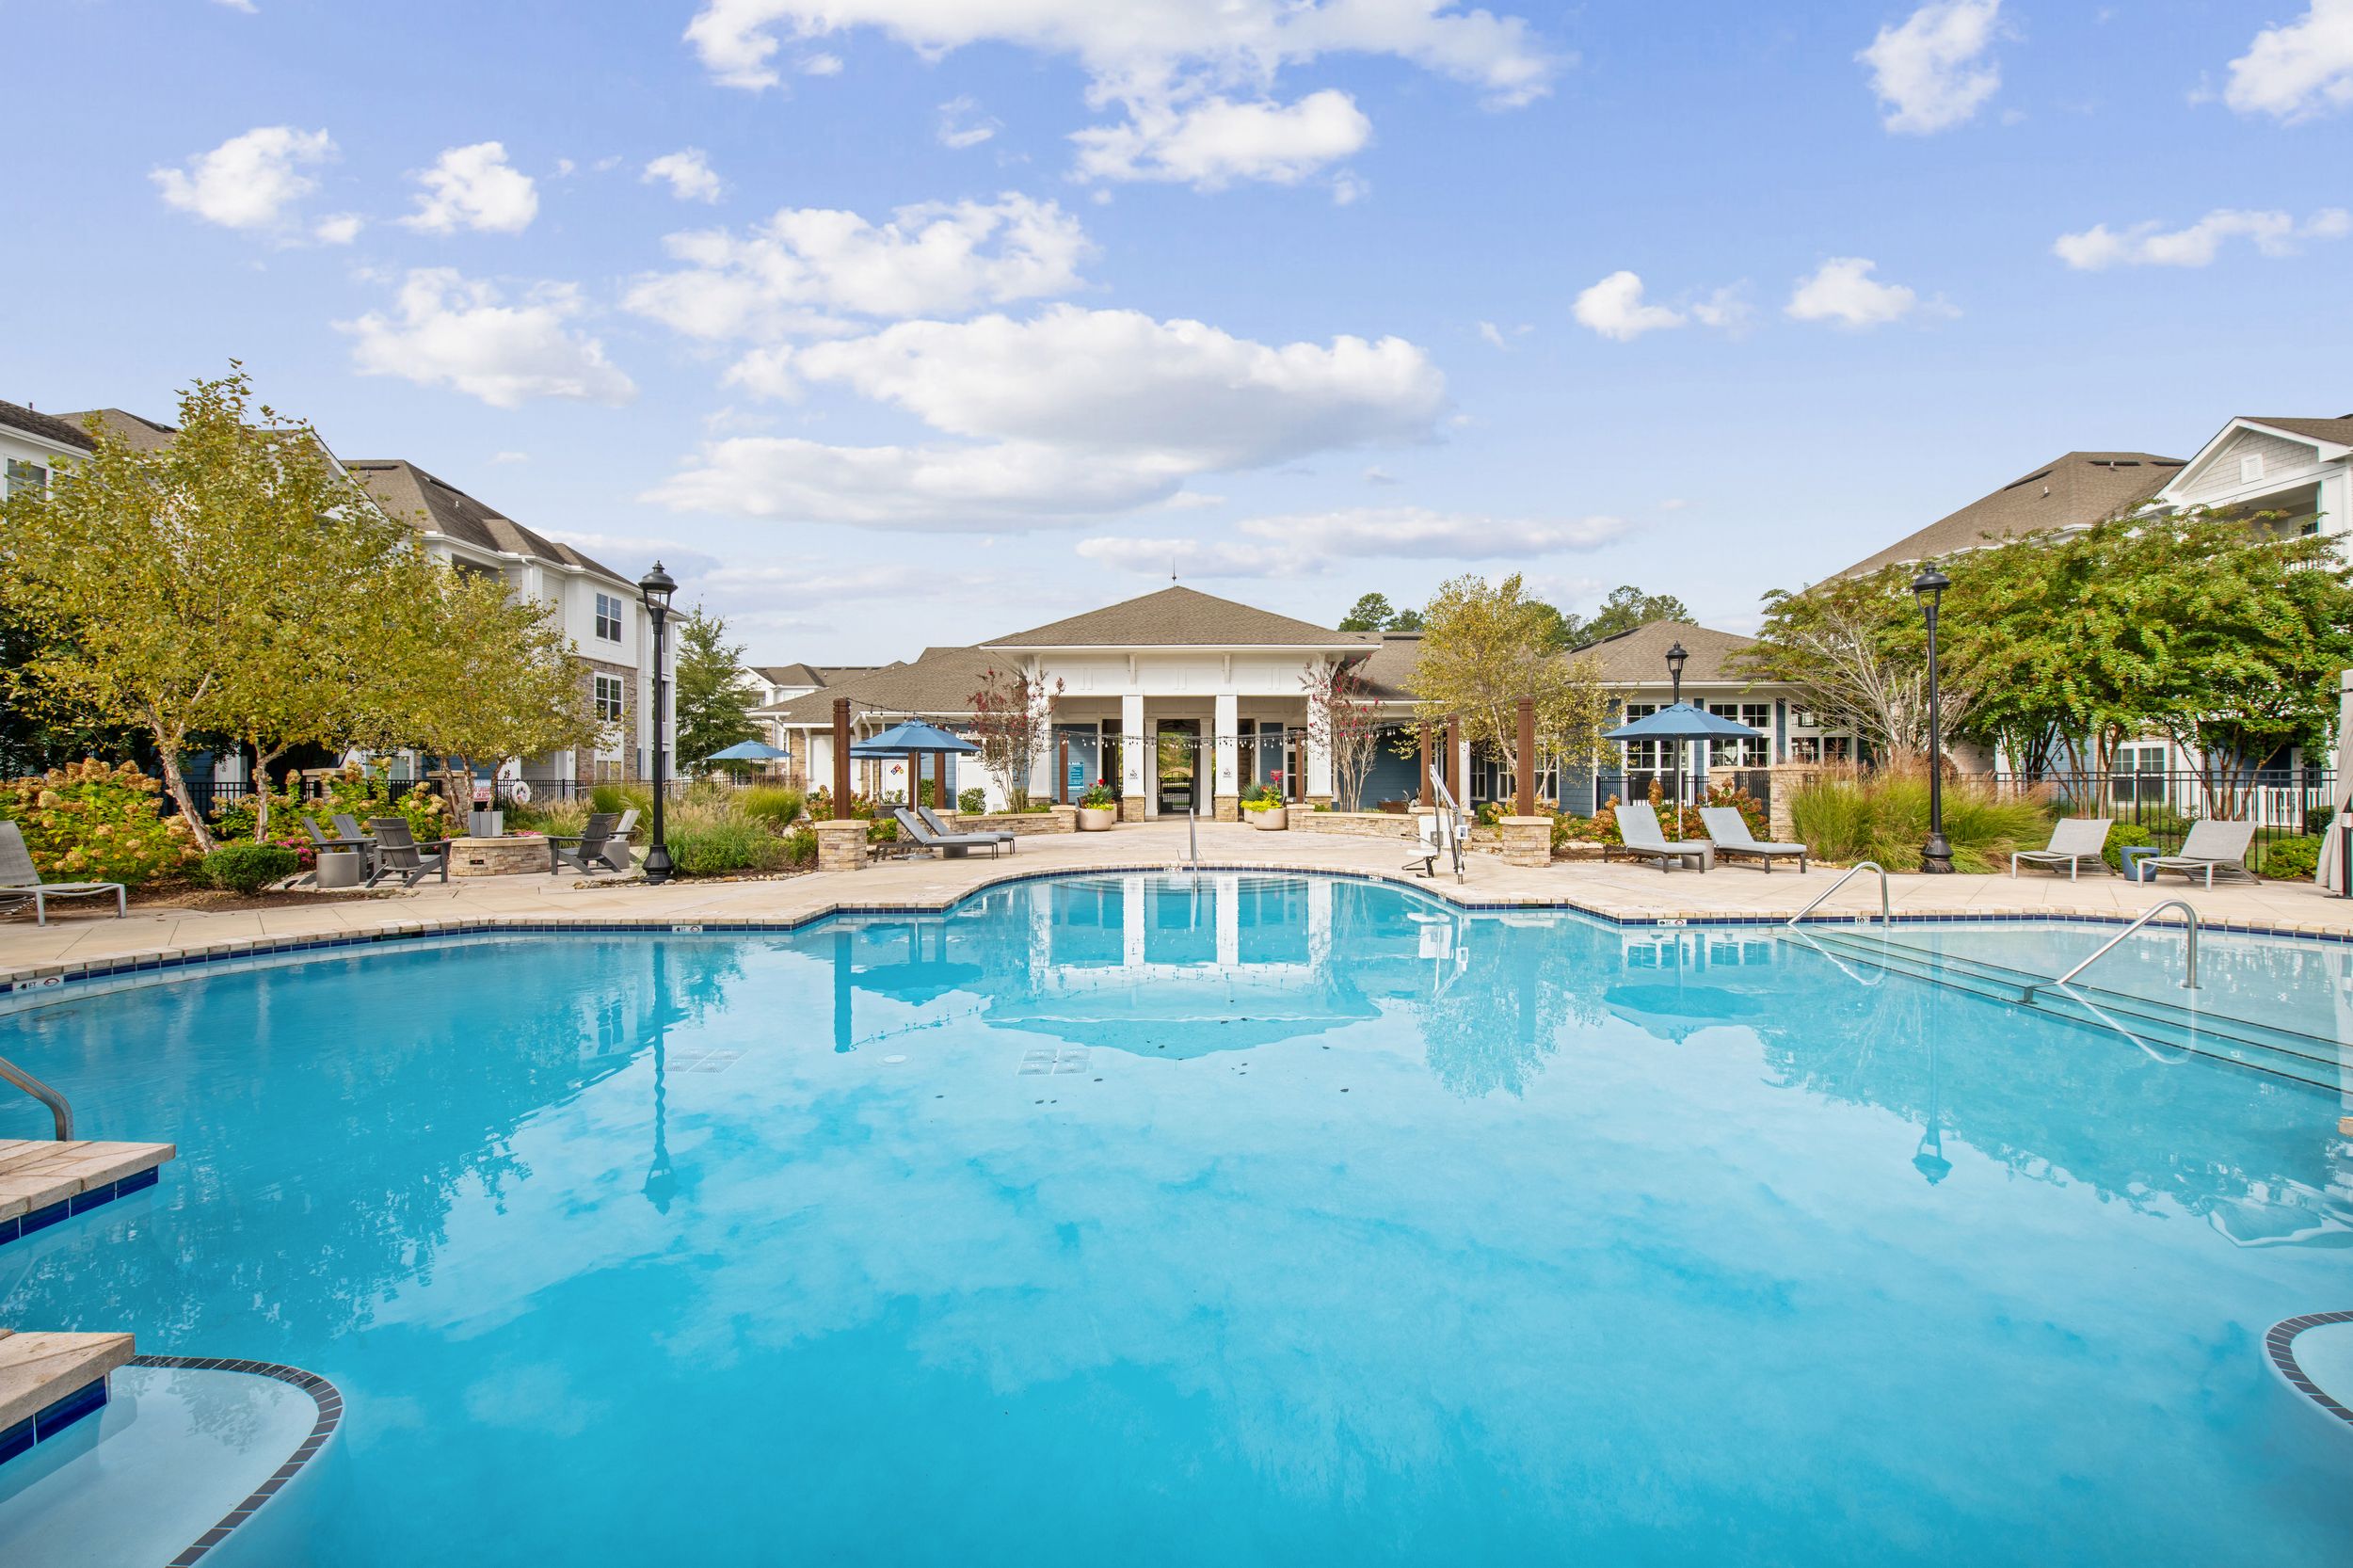 Resort-Style Saltwater Pool Area with Sun Shelf at Patterson Place Apartments.